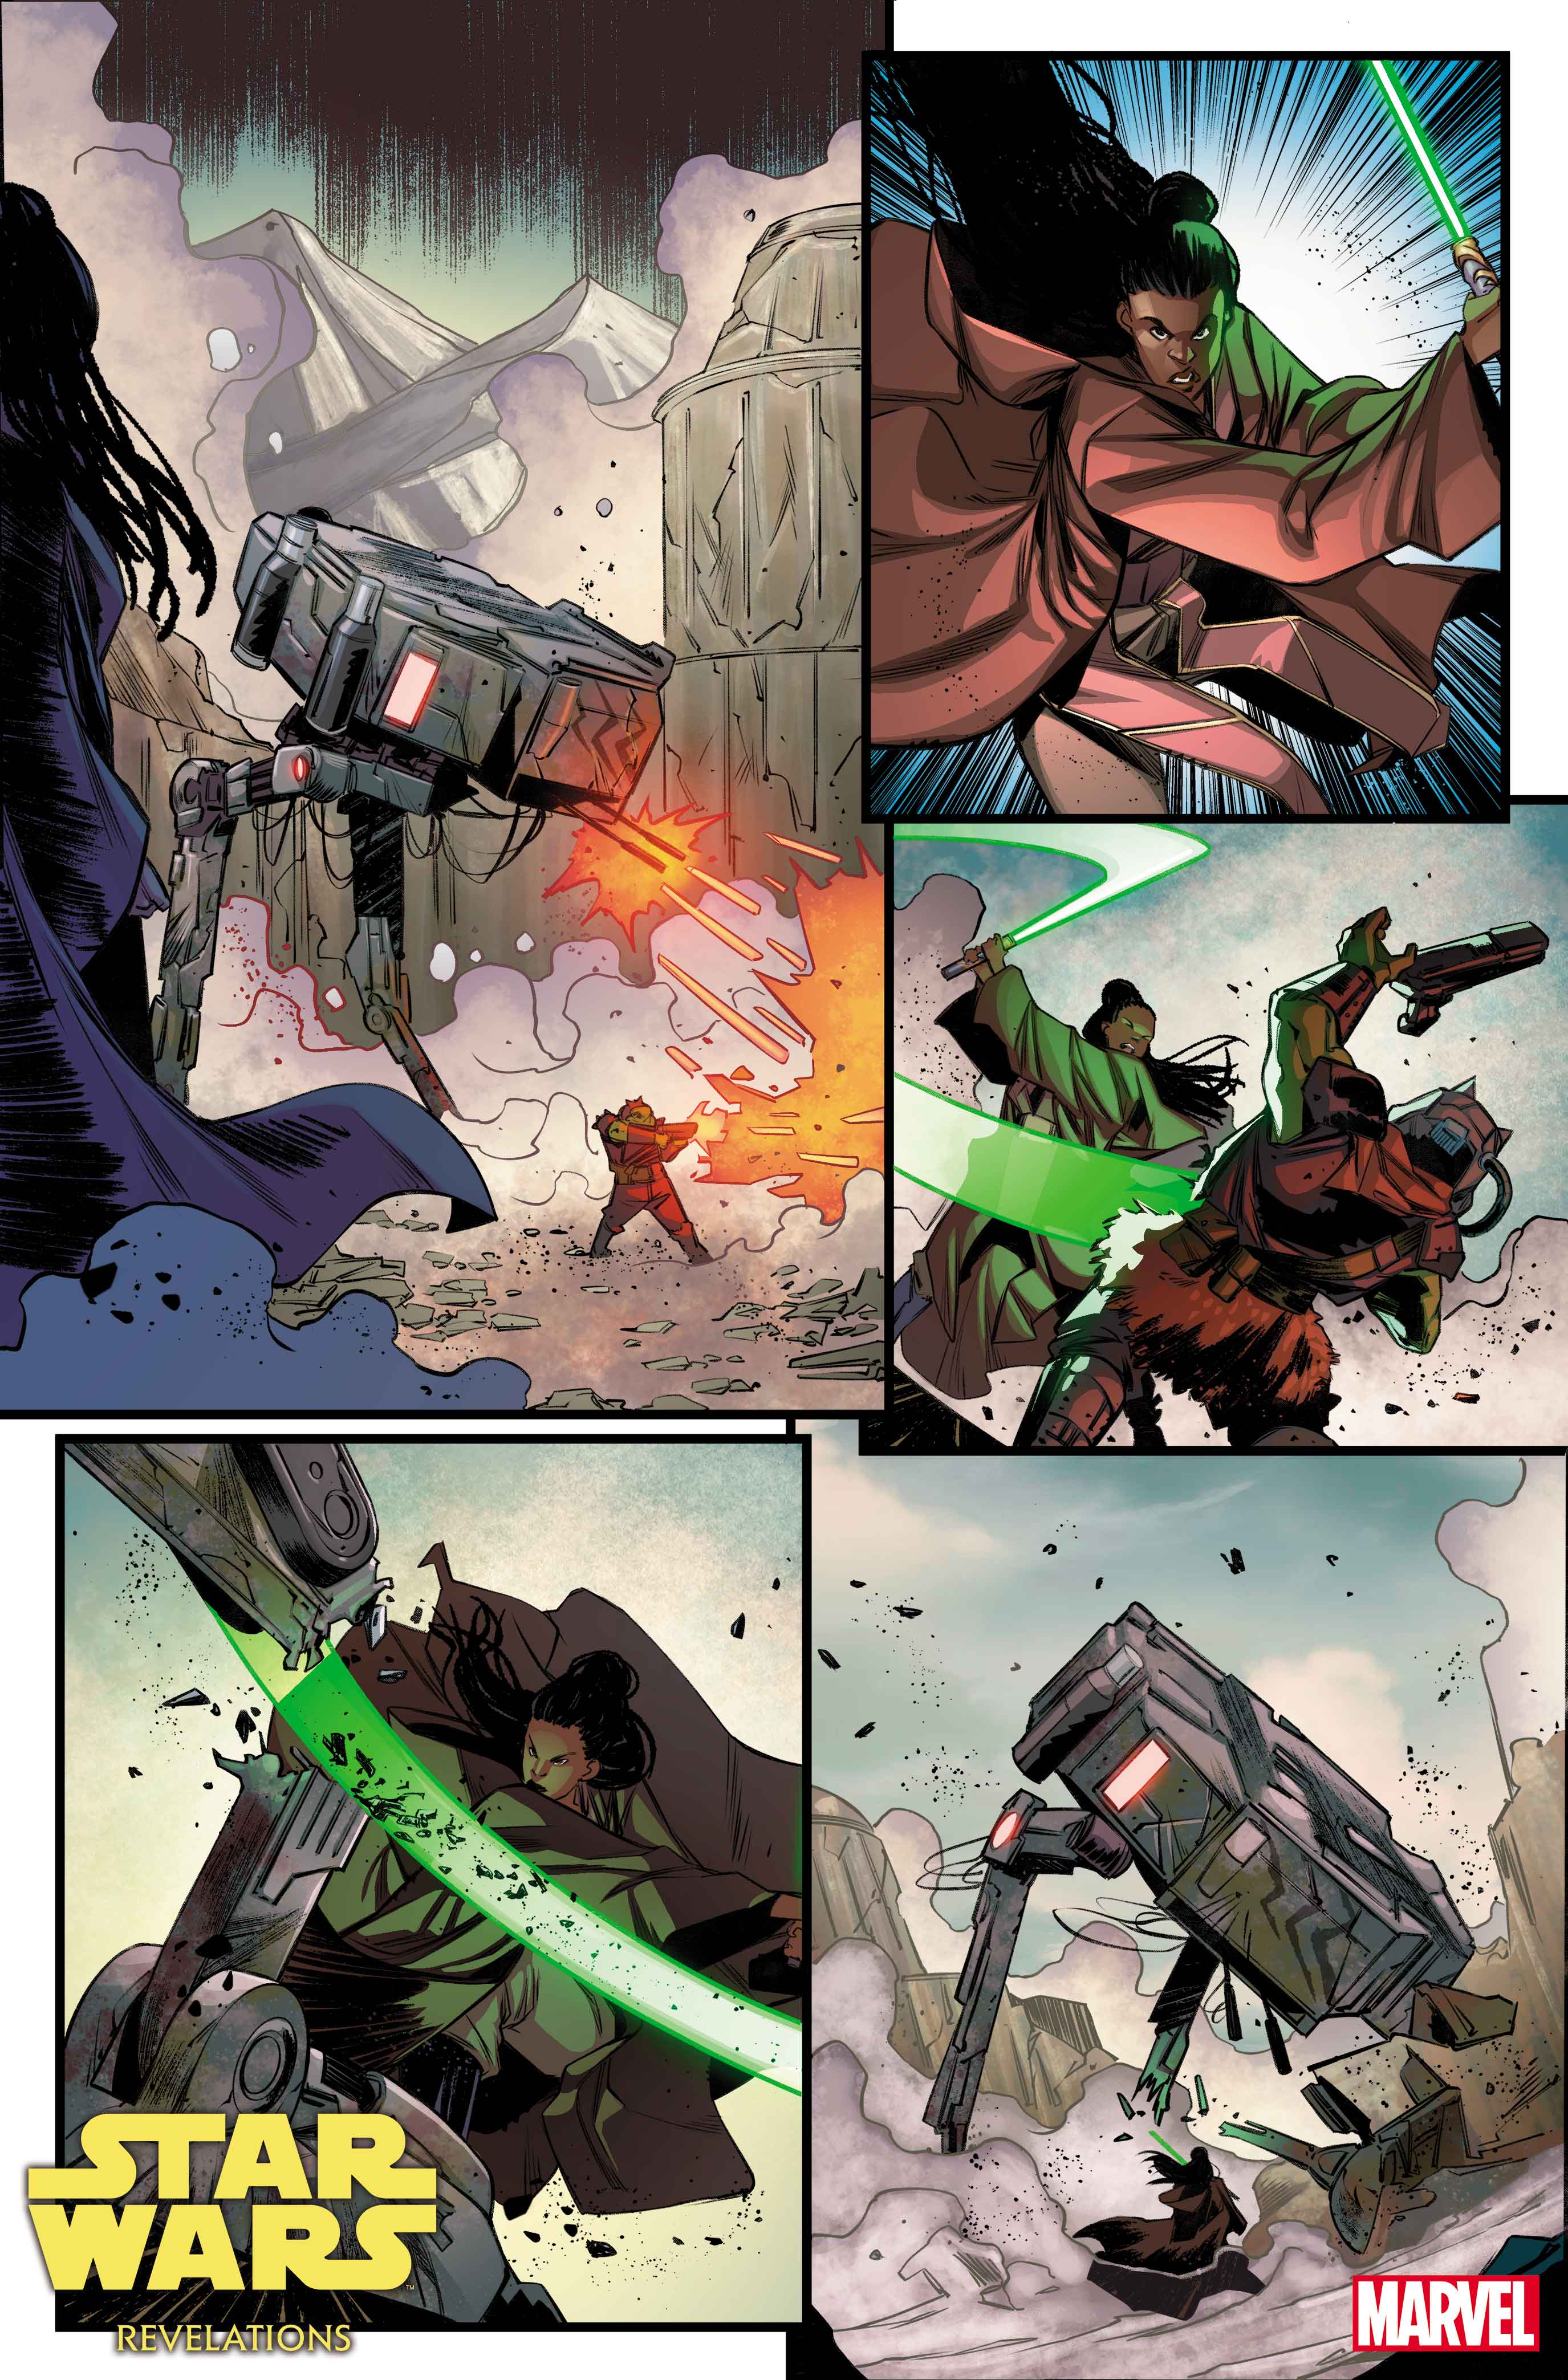 Pages from Star Wars: Revelations #1